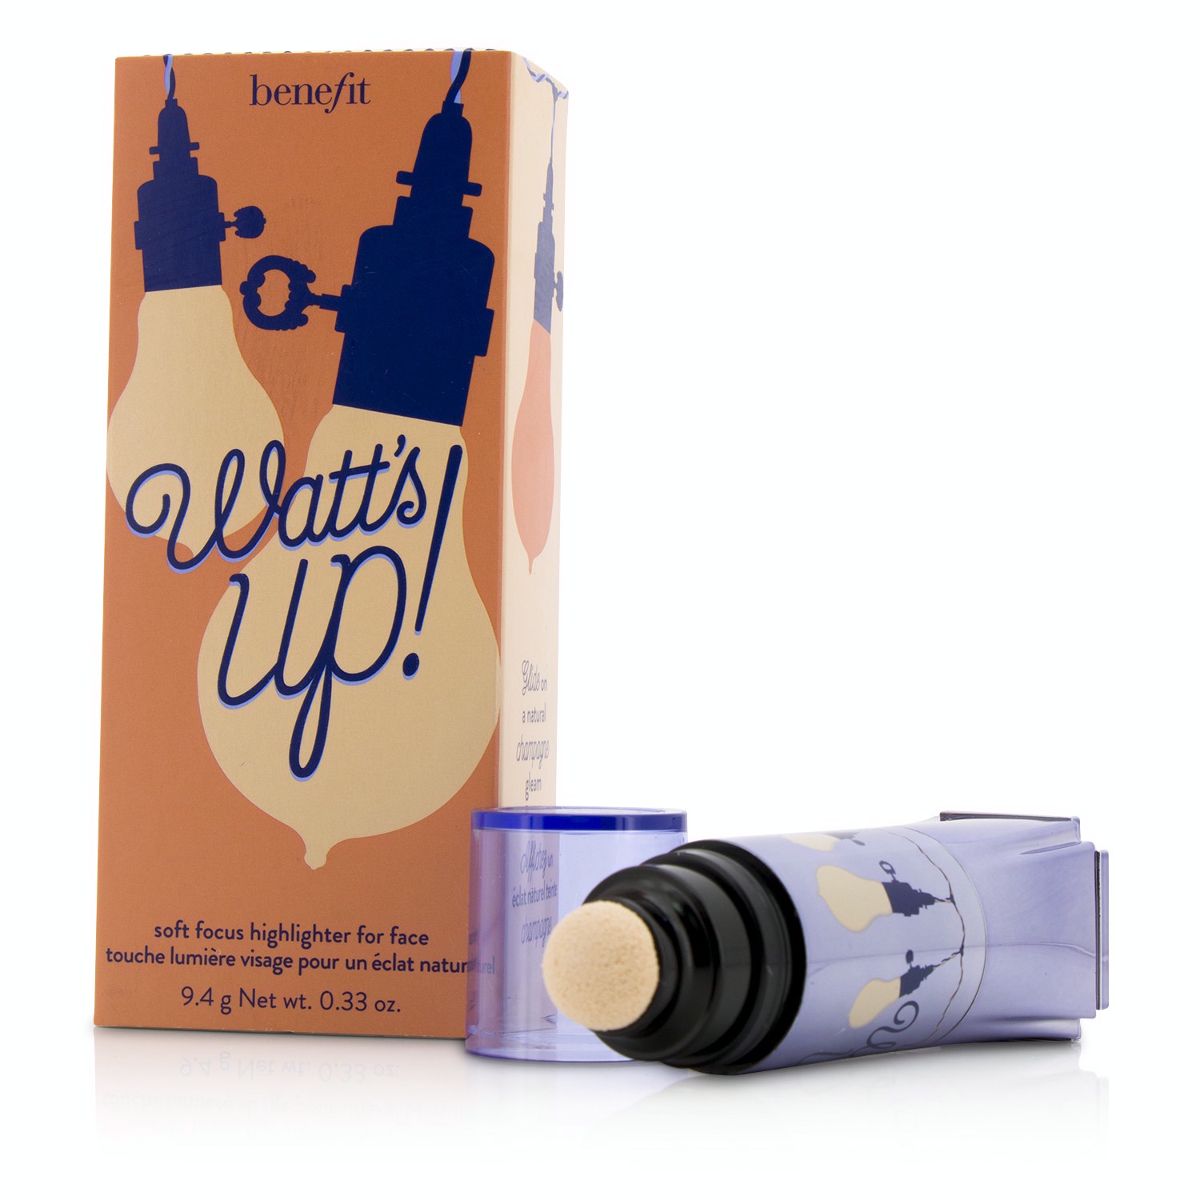 Watts Up (Soft Focus Highlighter For Face) Benefit Image